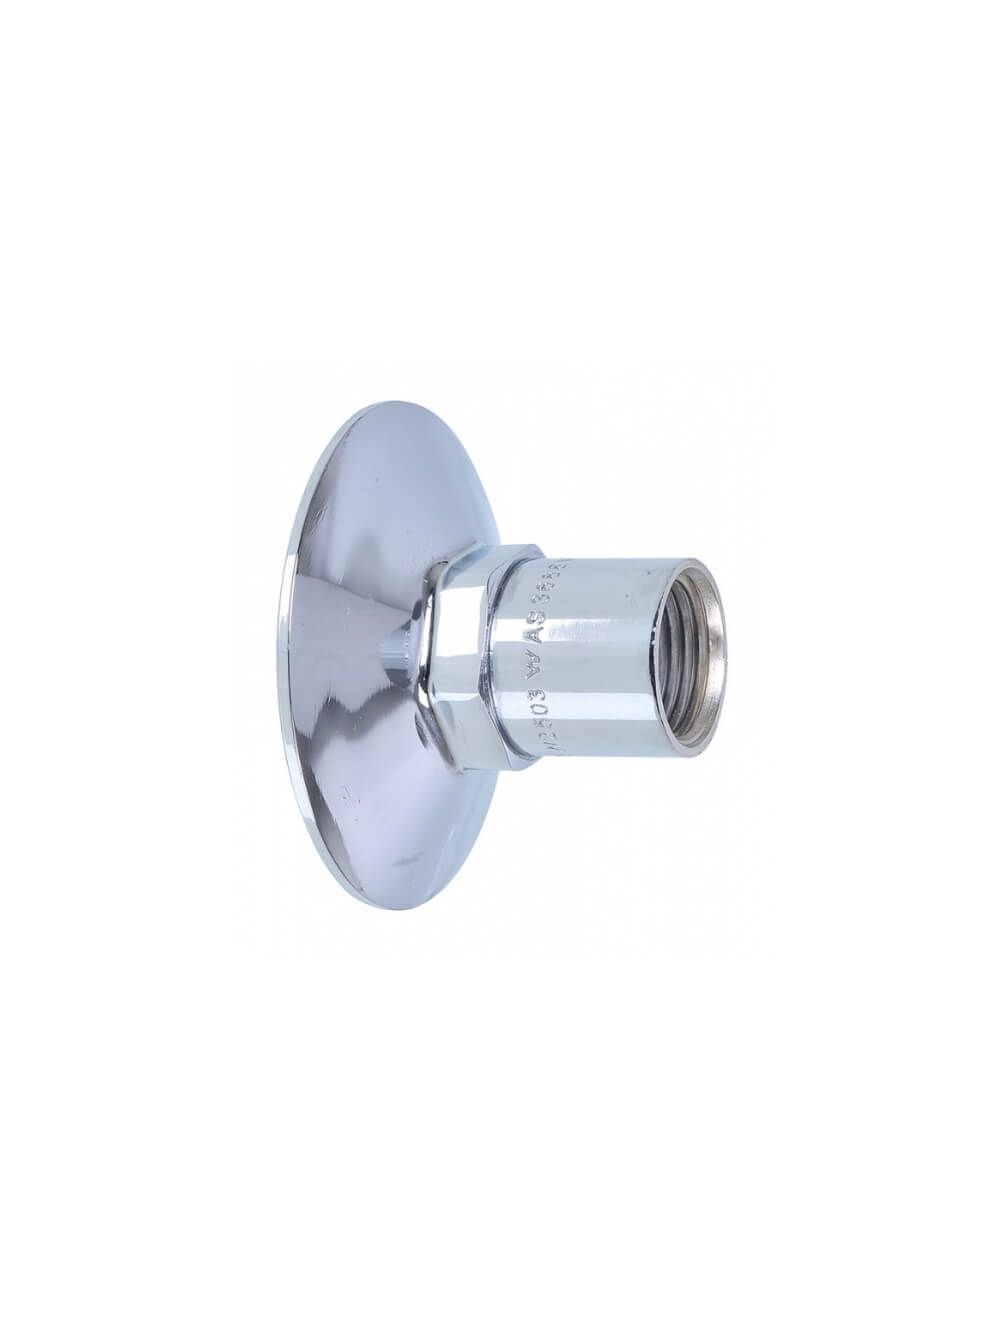 Details about   Chrome Bib Tap Extension Fixed Length 1/2" x 50mm Male to Female Joiner 